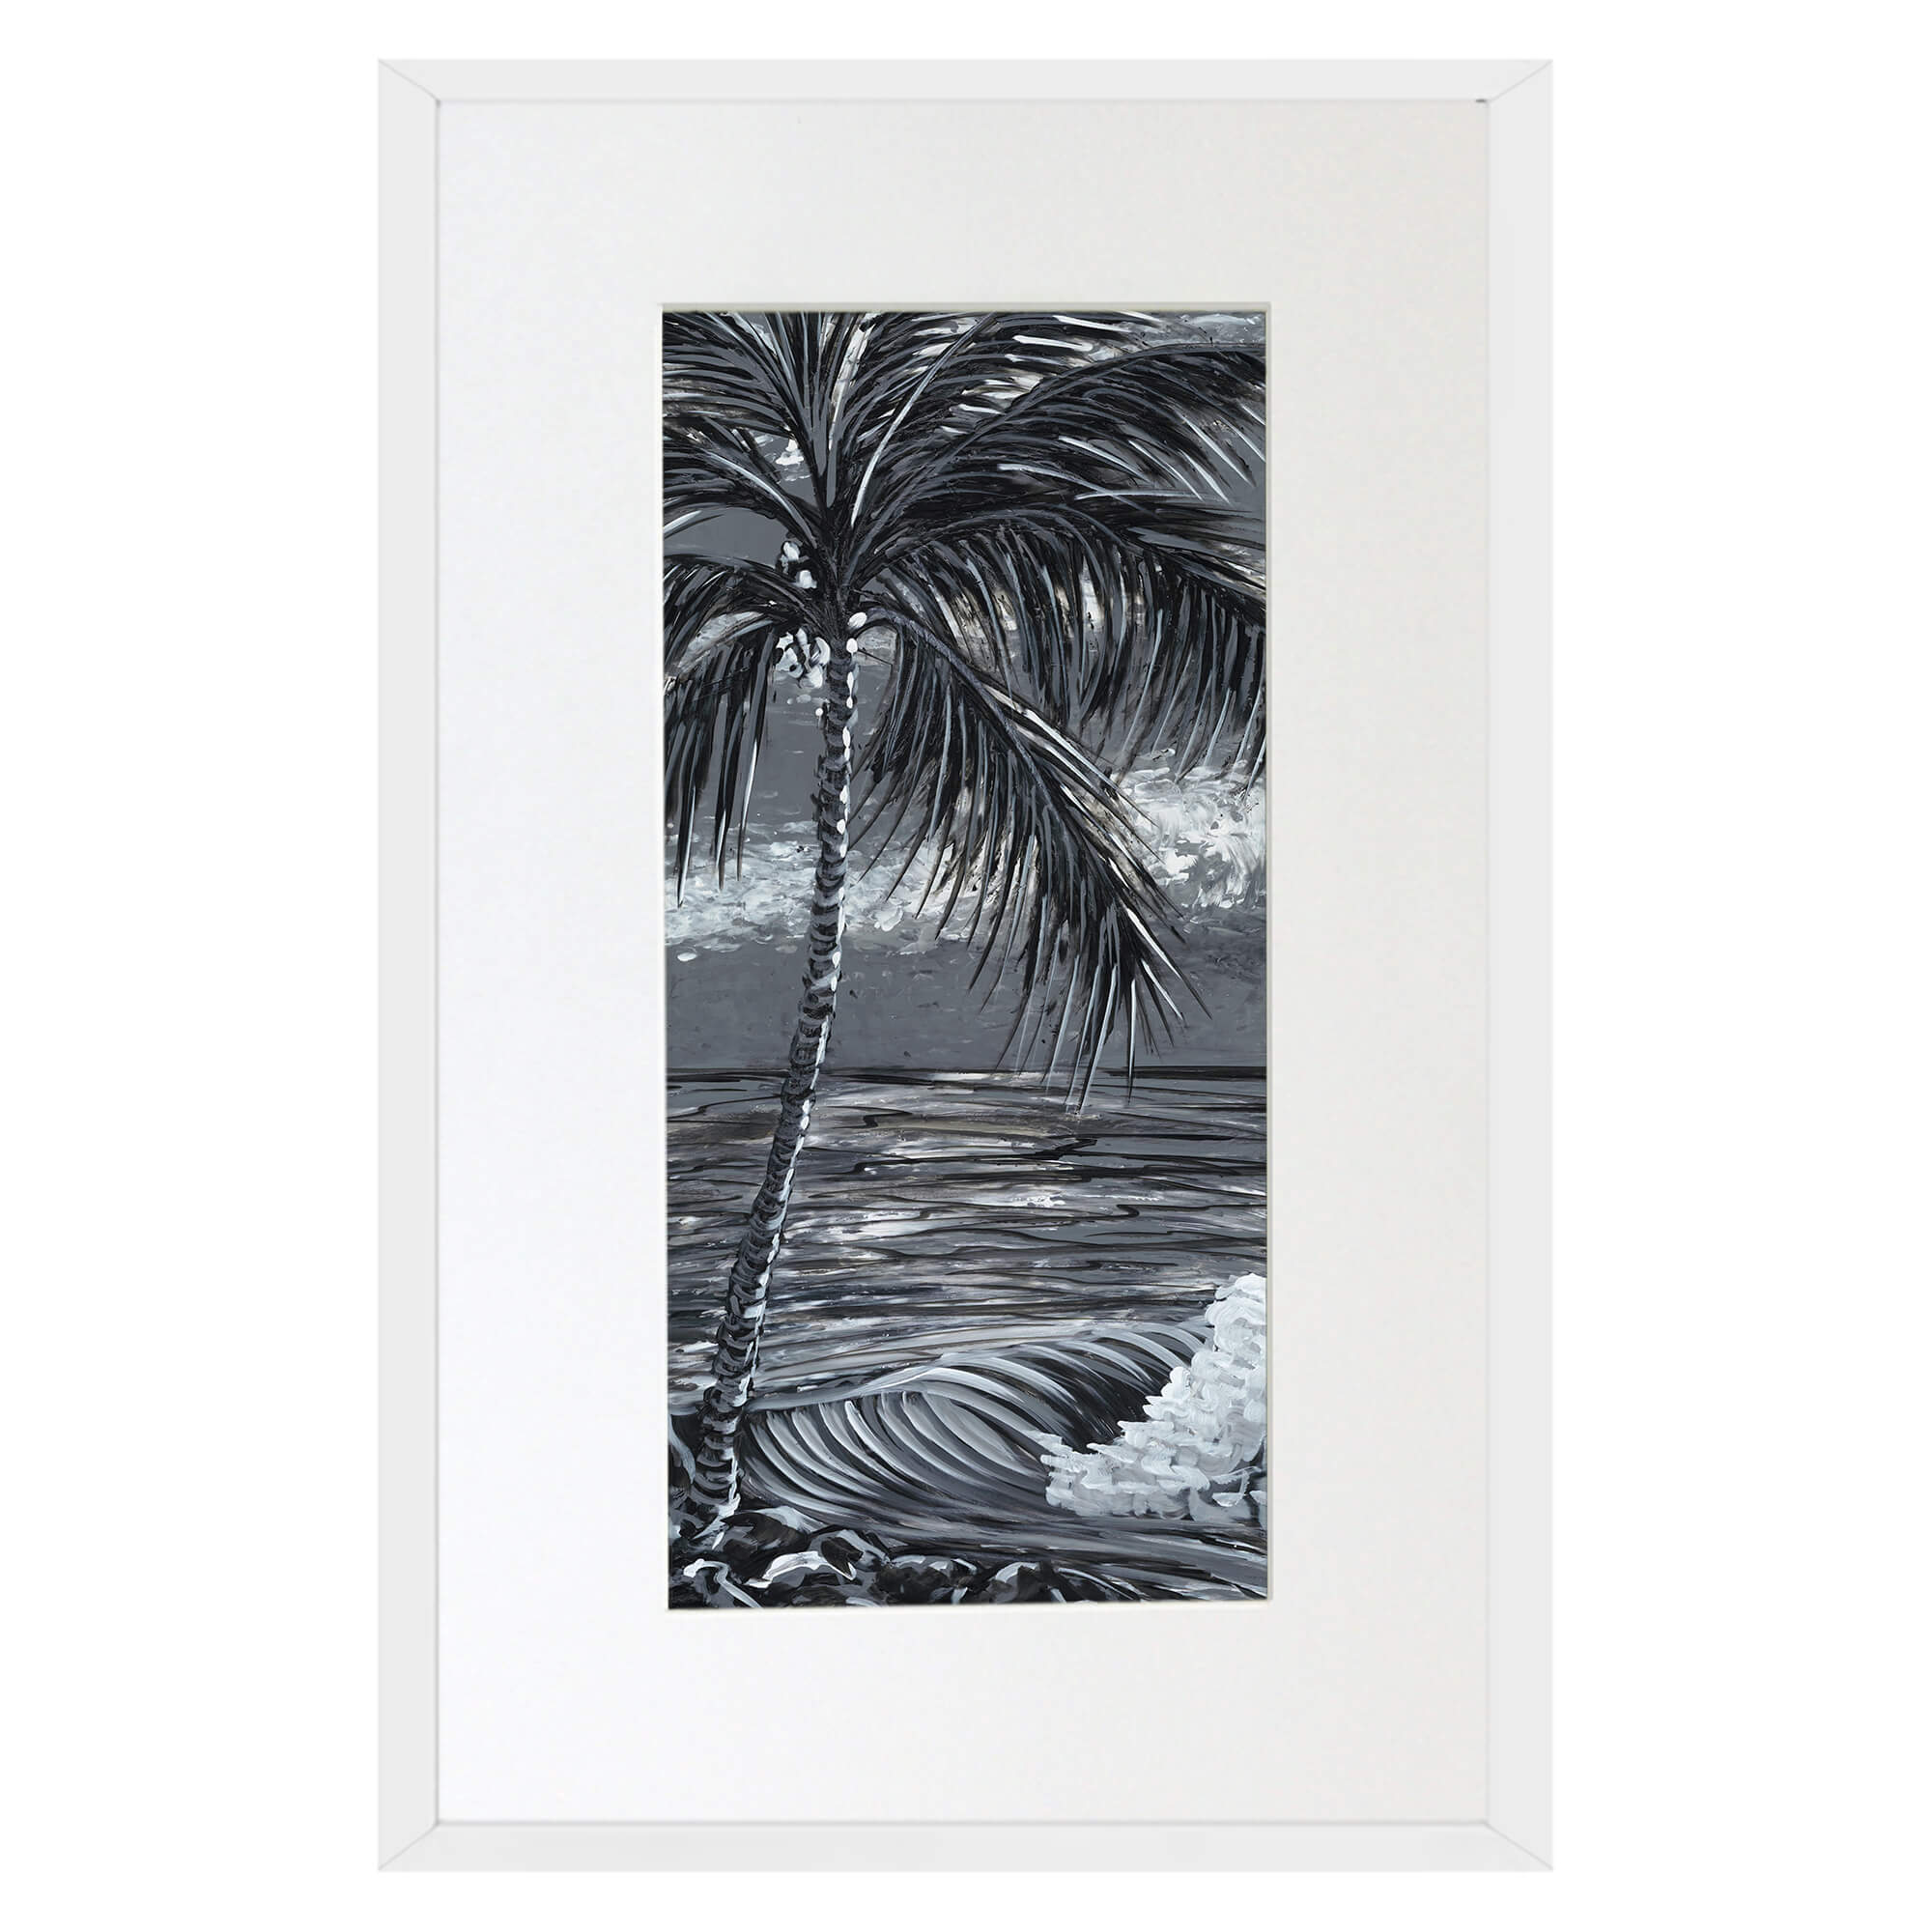 Matted art print with white frame featuring the sky by hawaii artist Suzanne MacAdam